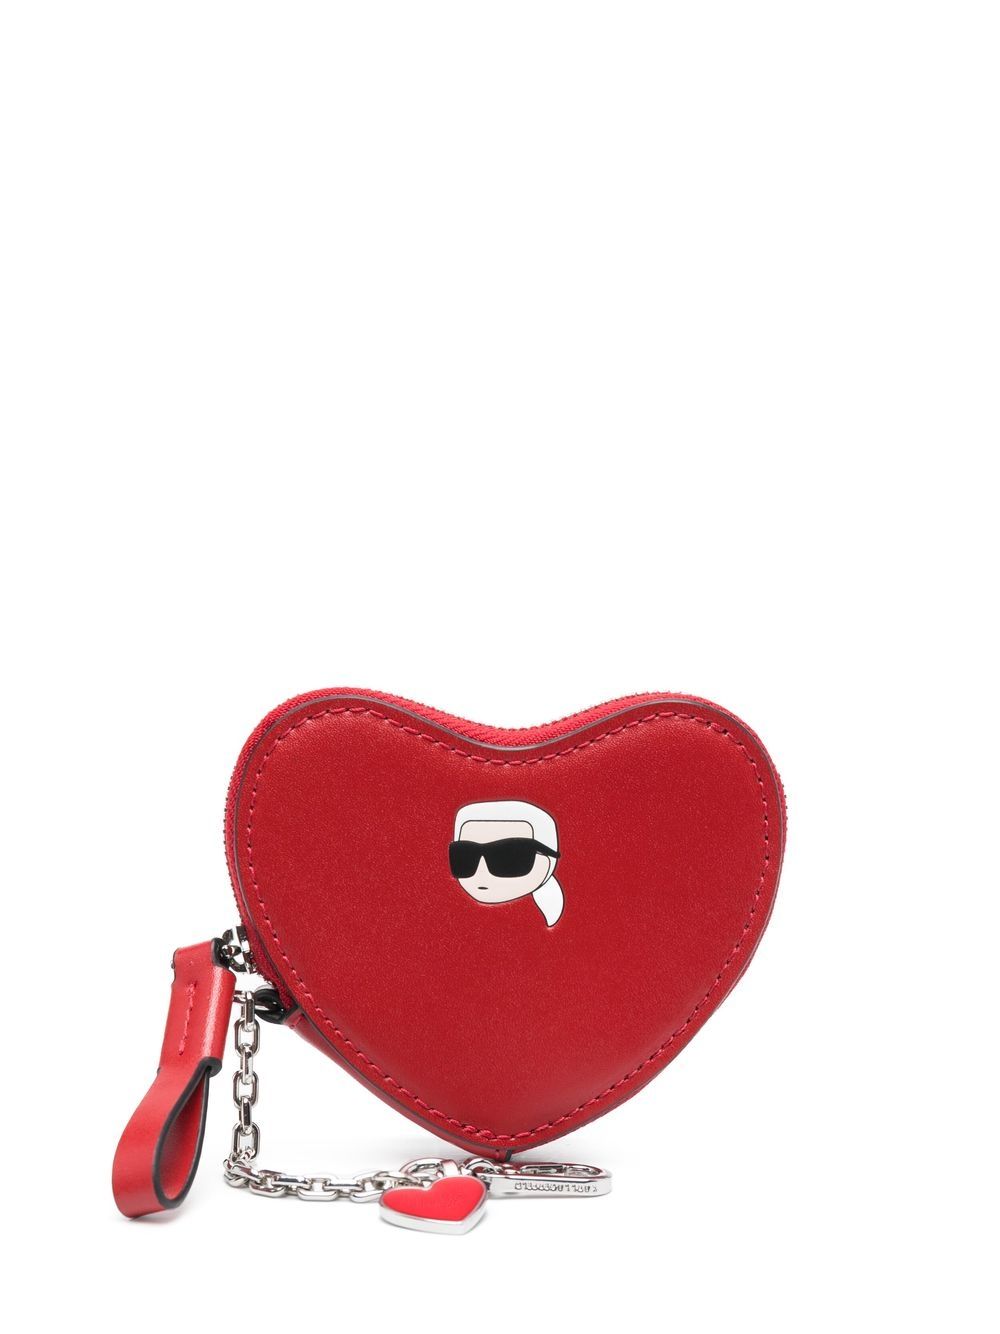 Karl Lagerfeld Heart-shaped Coin Purse In Red